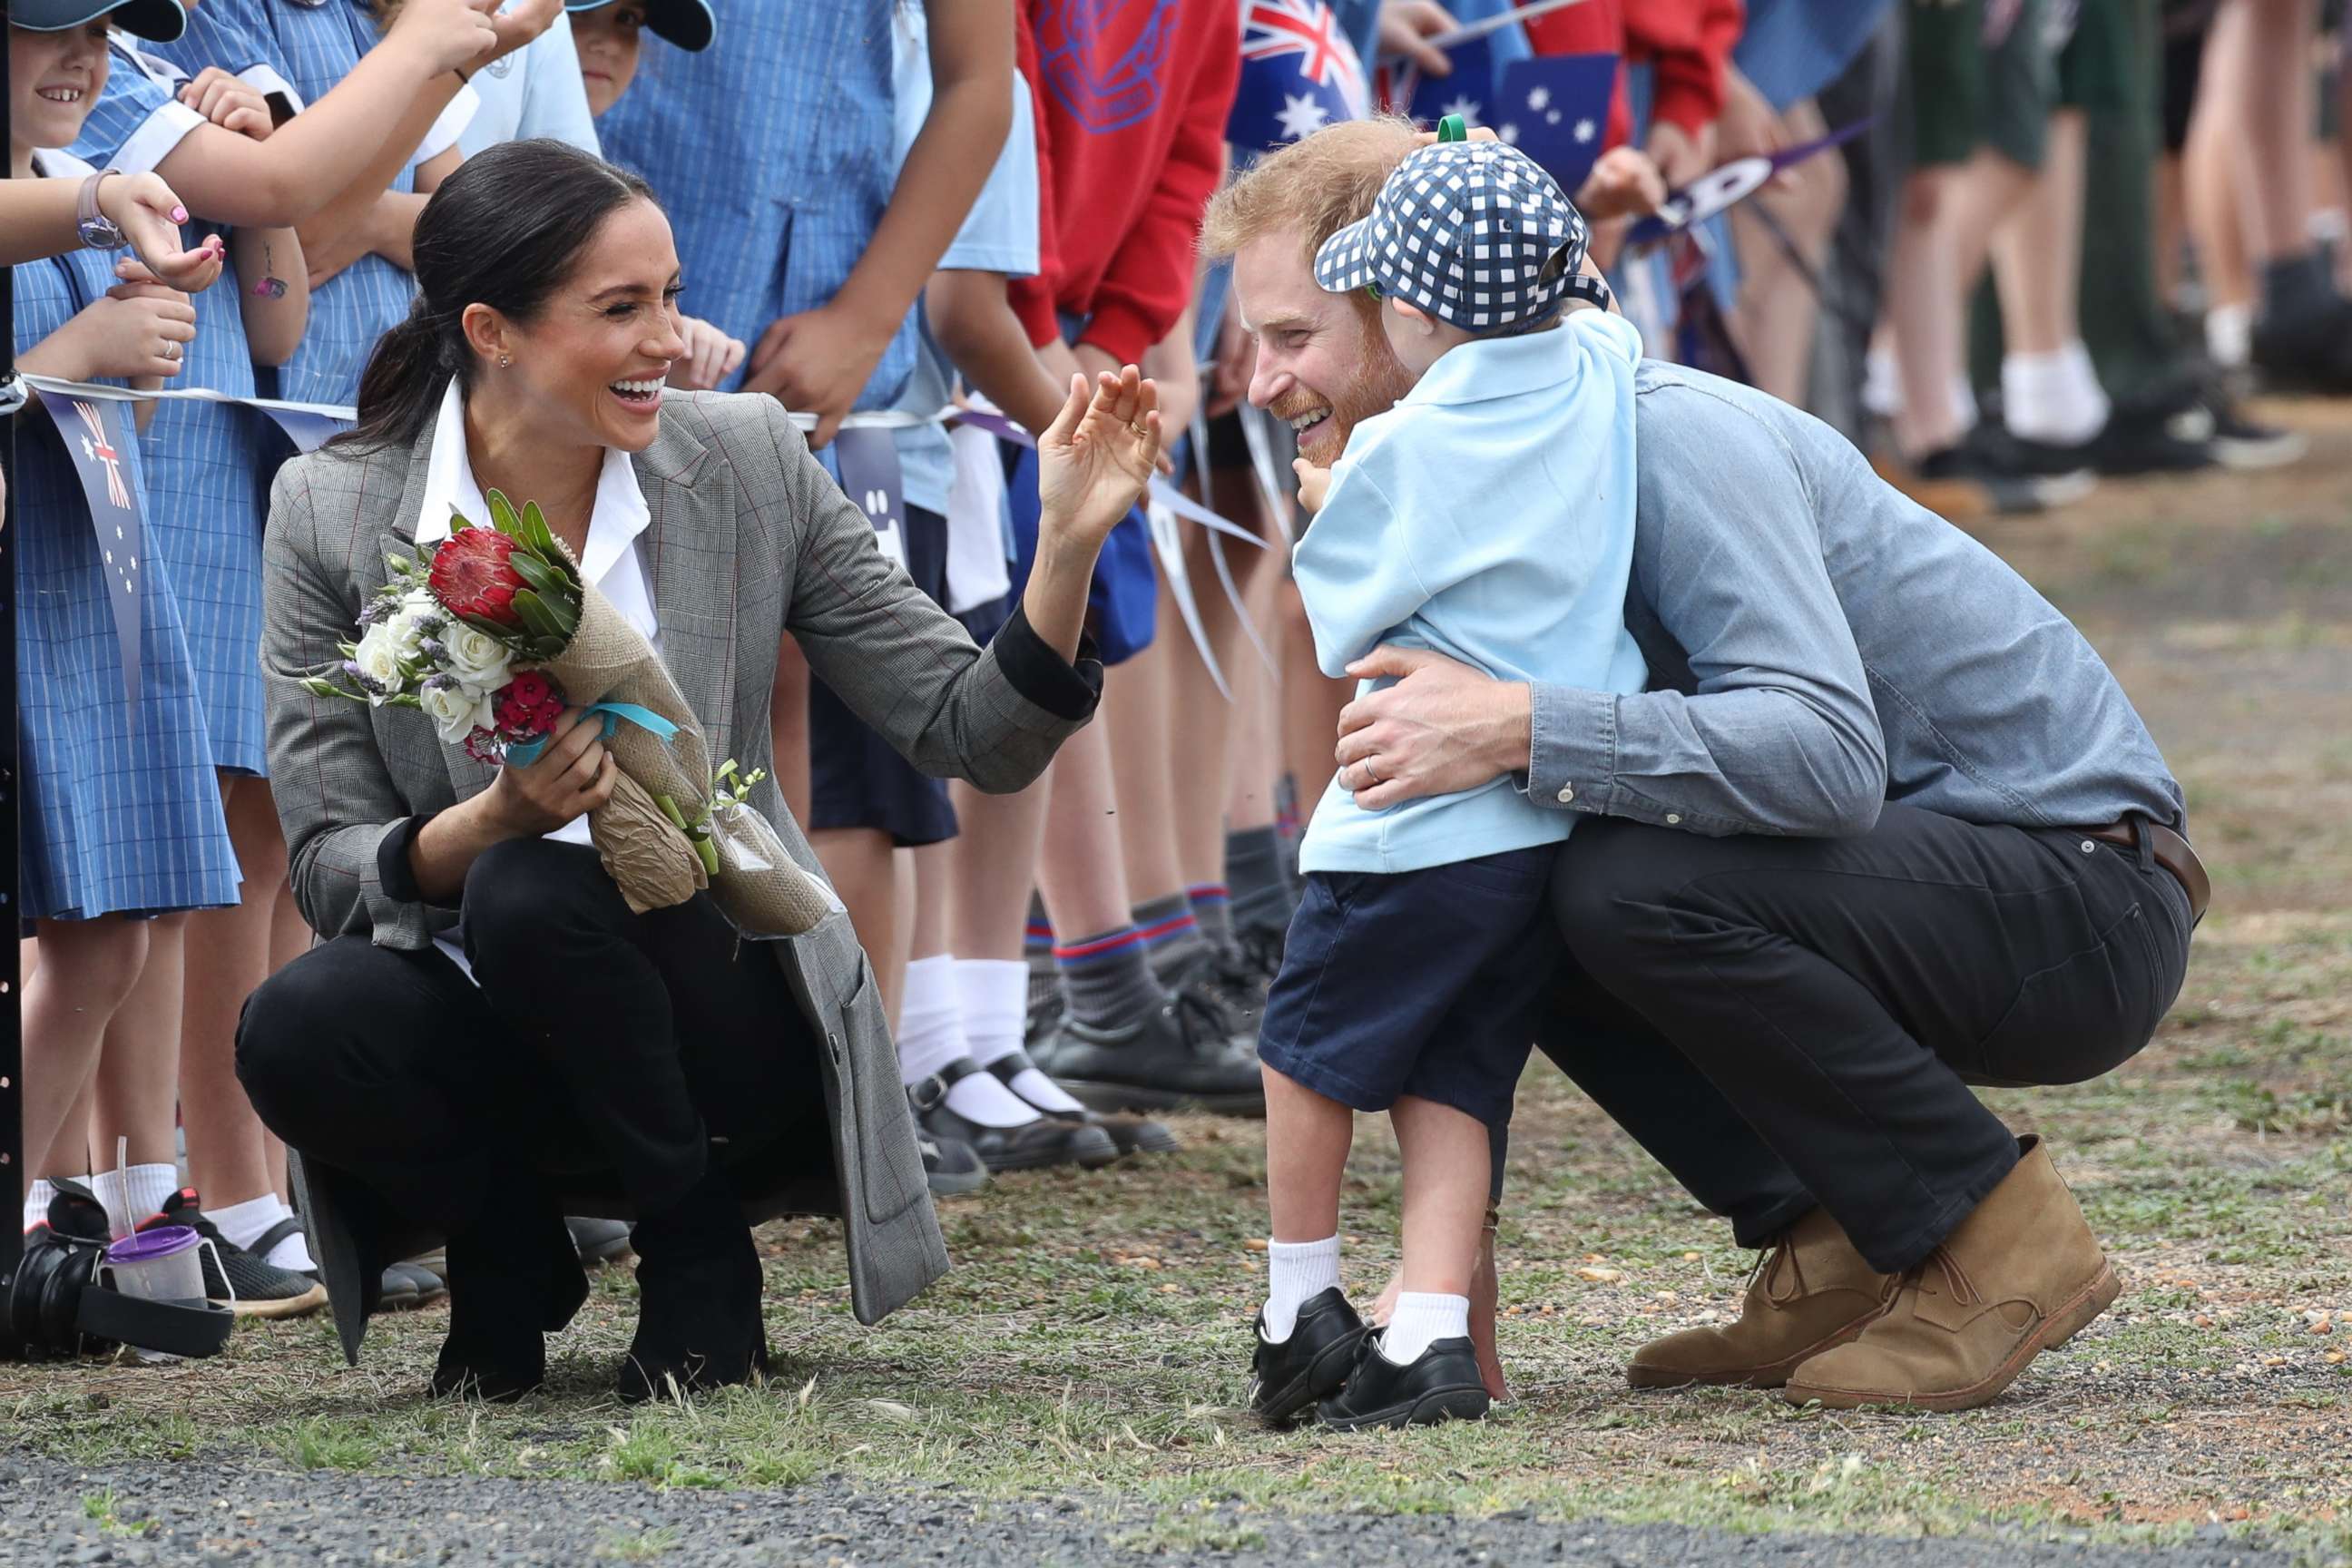 PHOTO: Prince Harry and Meghan Markle, The Duke and Duchess of Sussex, arrive at Dubbo Airport, Australia, for a naming dedication for a new aircraft at the Royal Flying Doctor Service based at the airport, on day two of their Royal Tour.